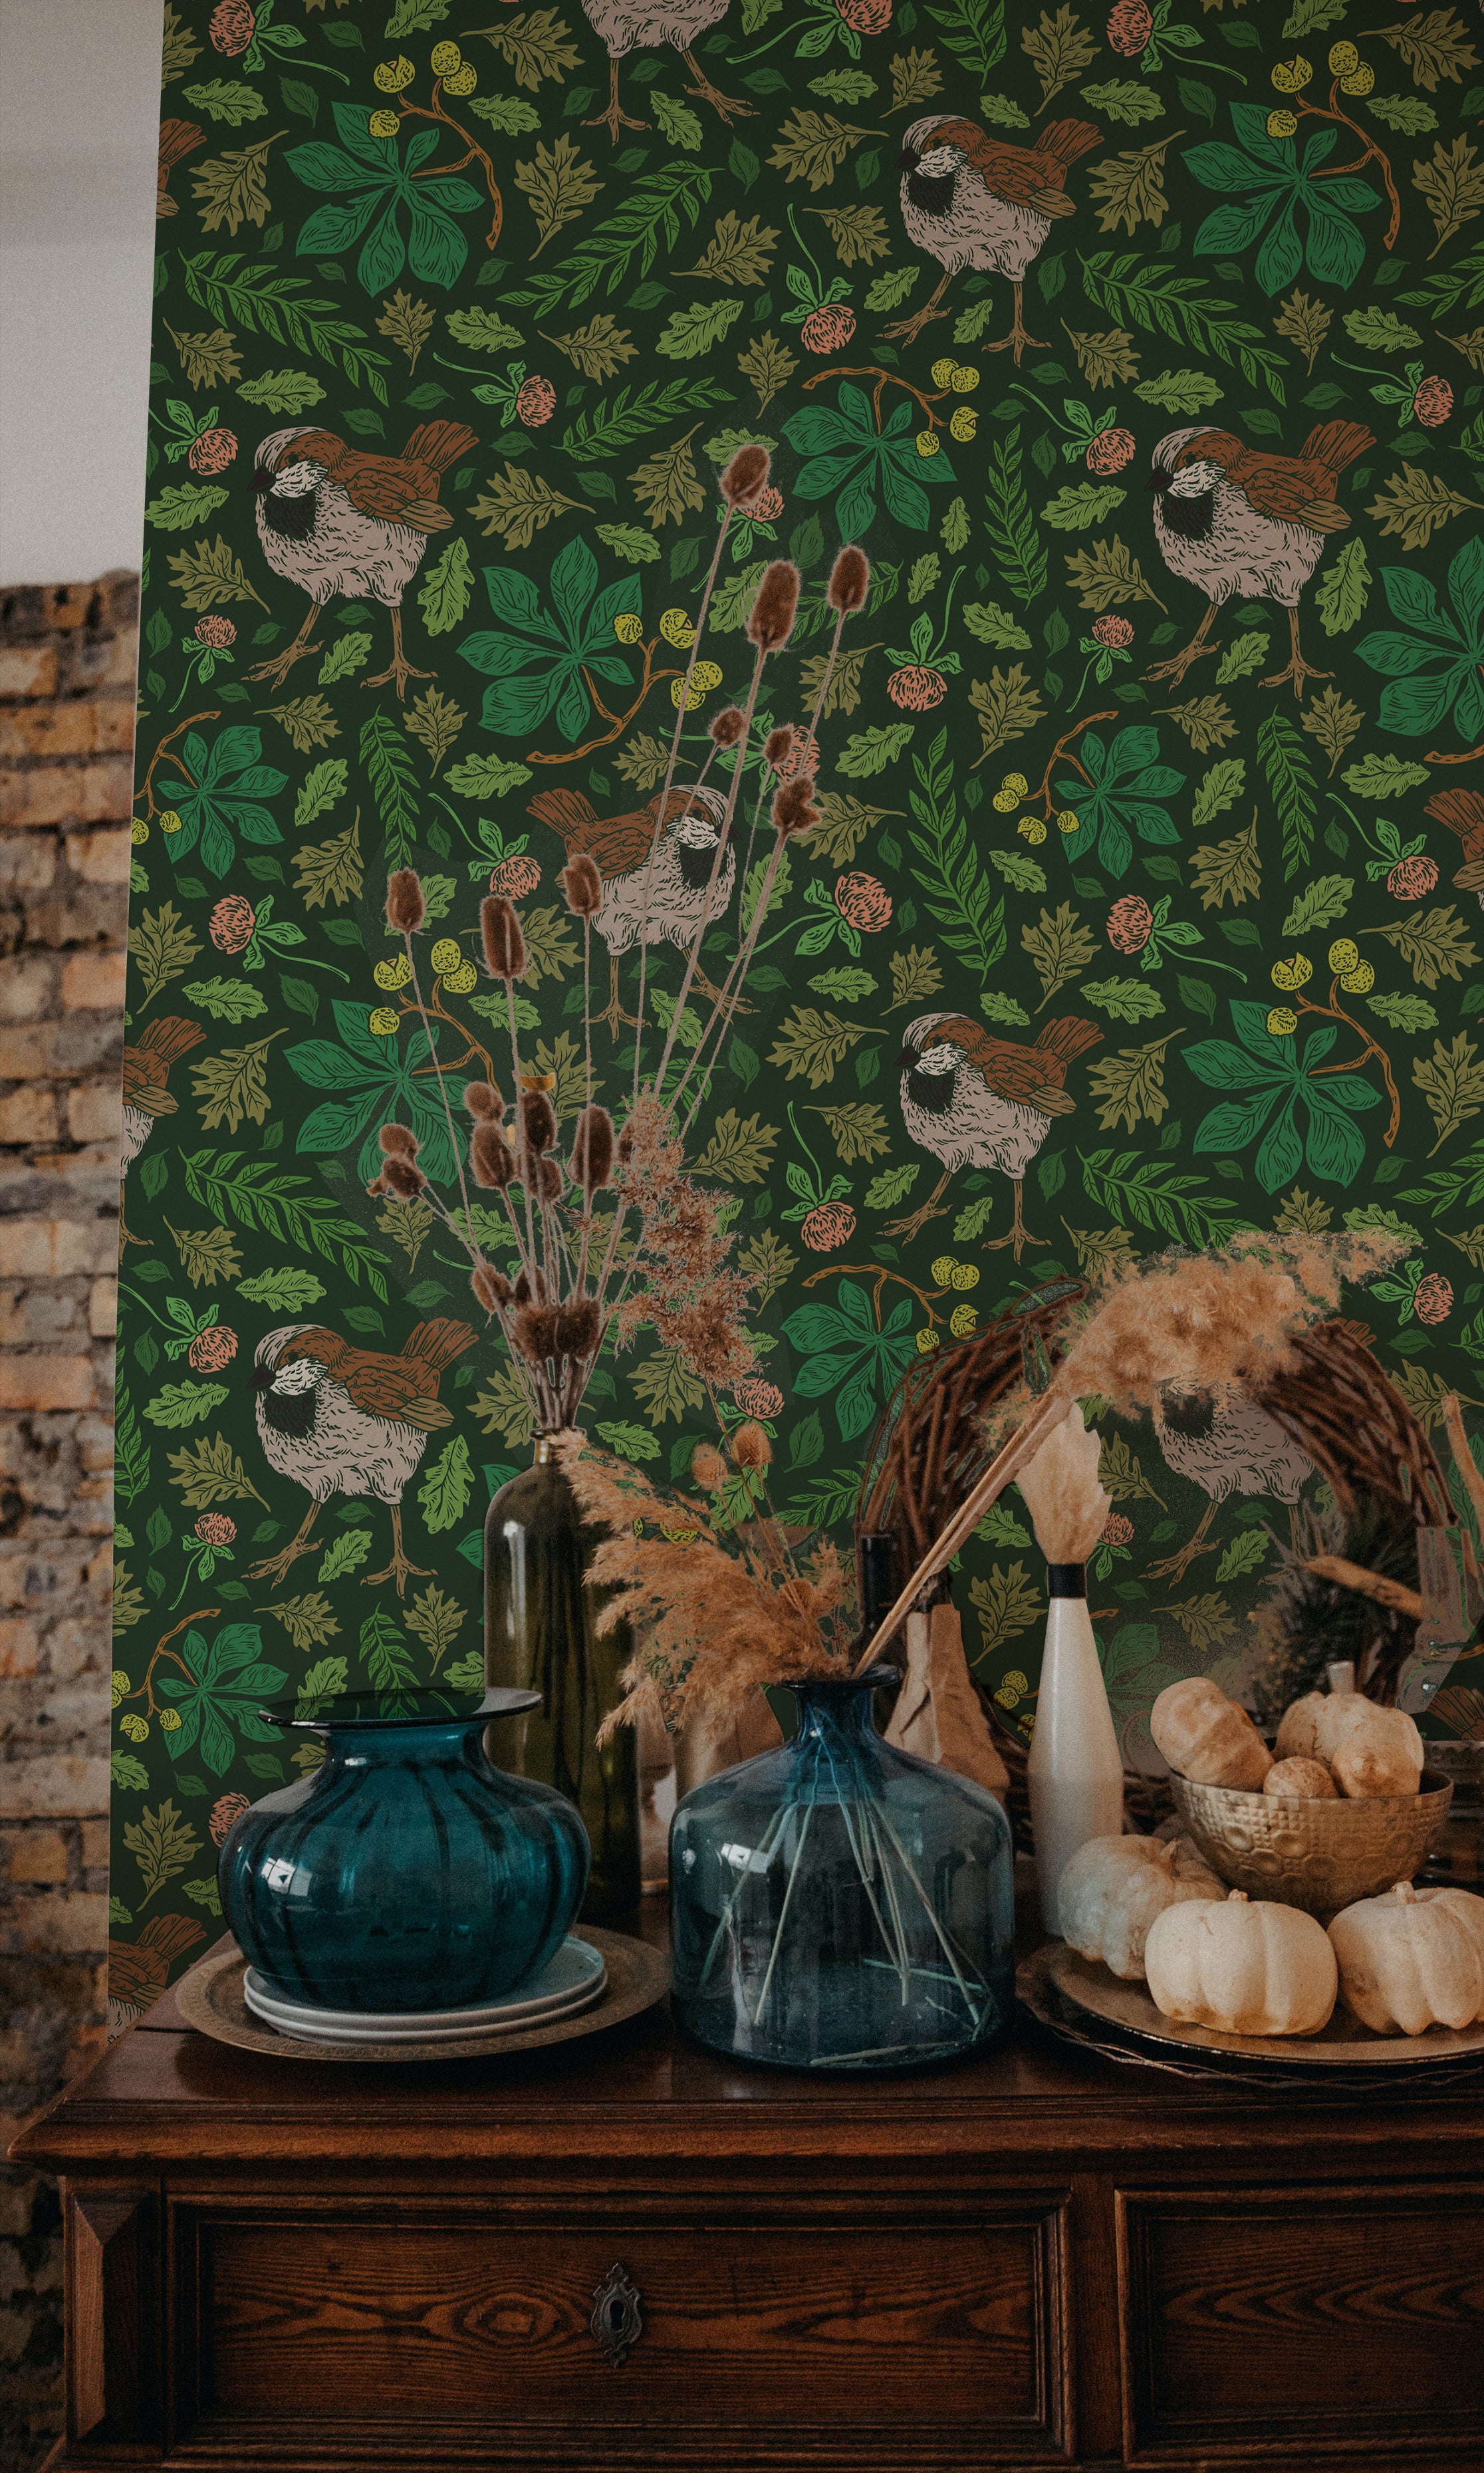 A vibrant green version of the vintage sparrow wallpaper decorates a wall, creating a bold backdrop to a rustic scene with a wooden sideboard, blue glass vases, dried plants, and white pumpkins. The wallpaper features brown sparrows amidst green foliage with small yellow and orange details.